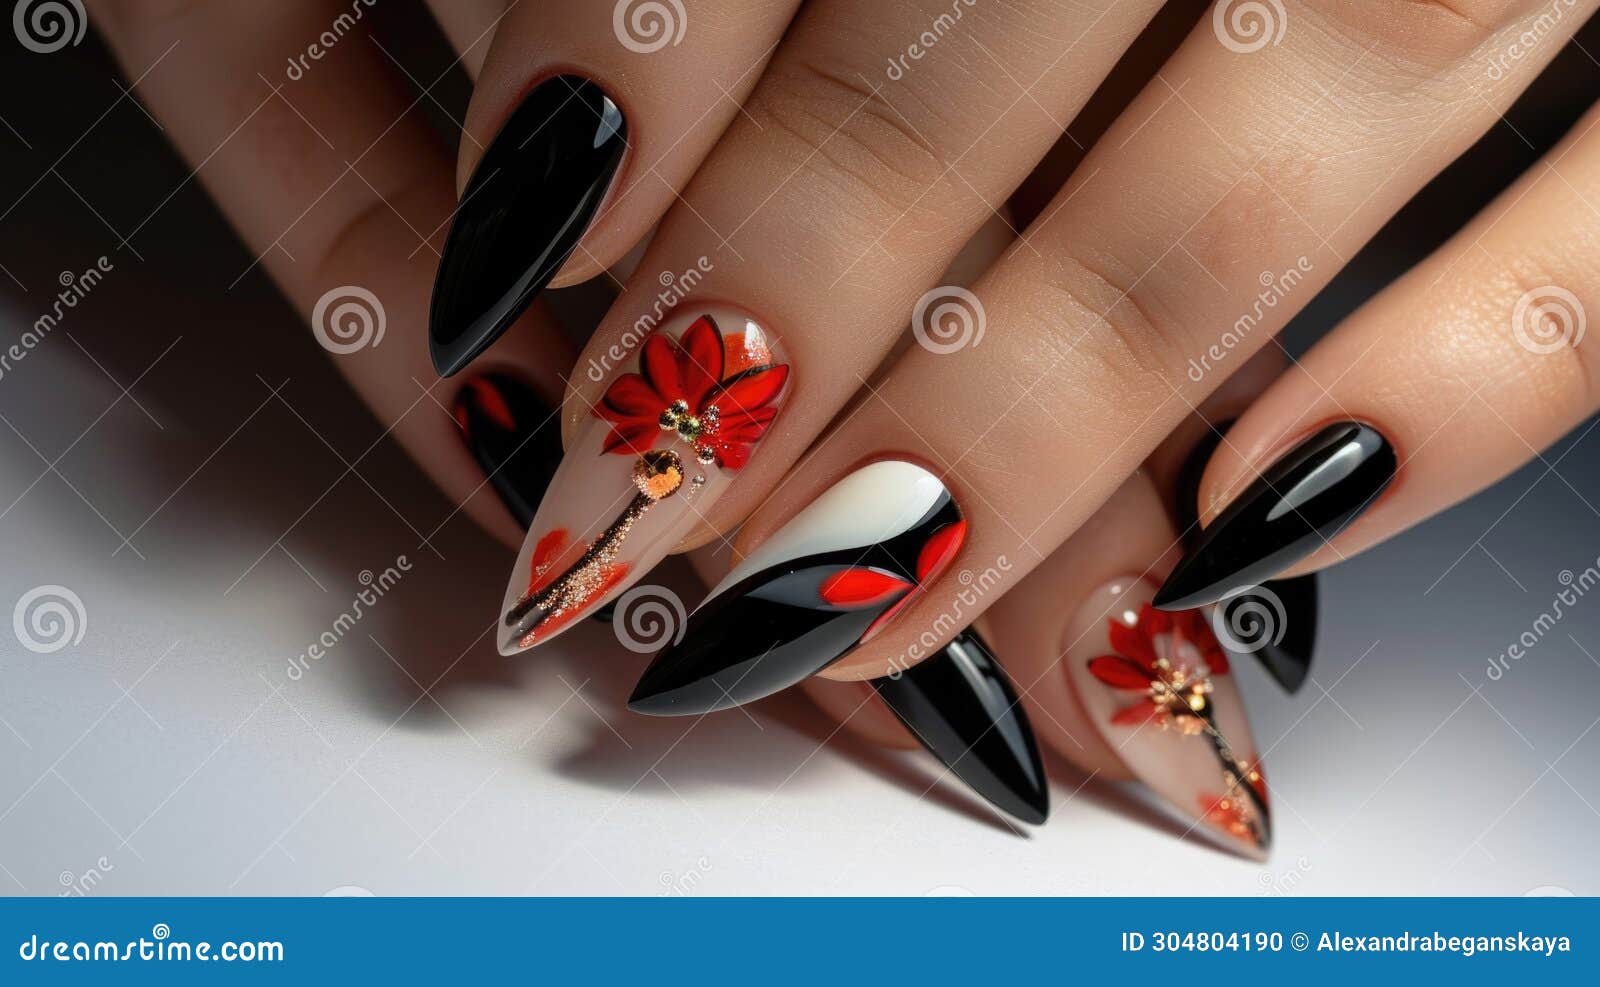 Artistic Nails Miami | This is a beautiful manicure!! We love this  technique, 3D Nail Art has been very popular this year!! . . . #3dnailart  #3dnails #beetlena... | Instagram